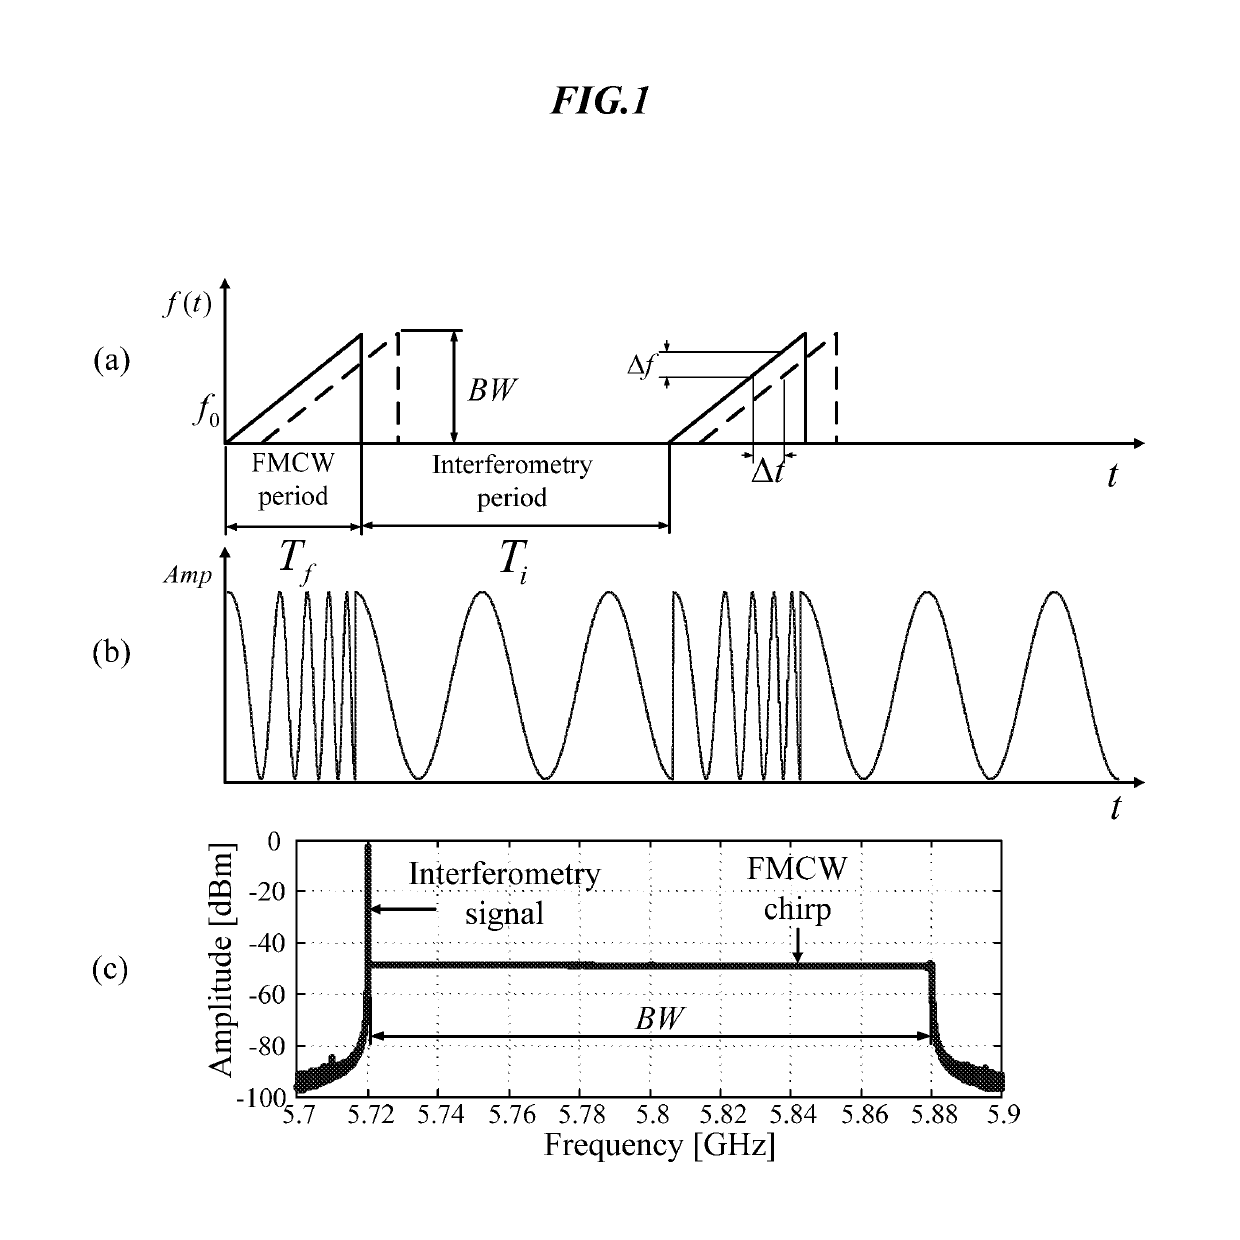 Hybrid FMCW-interferometry radar for positioning and monitoring and methods of using same